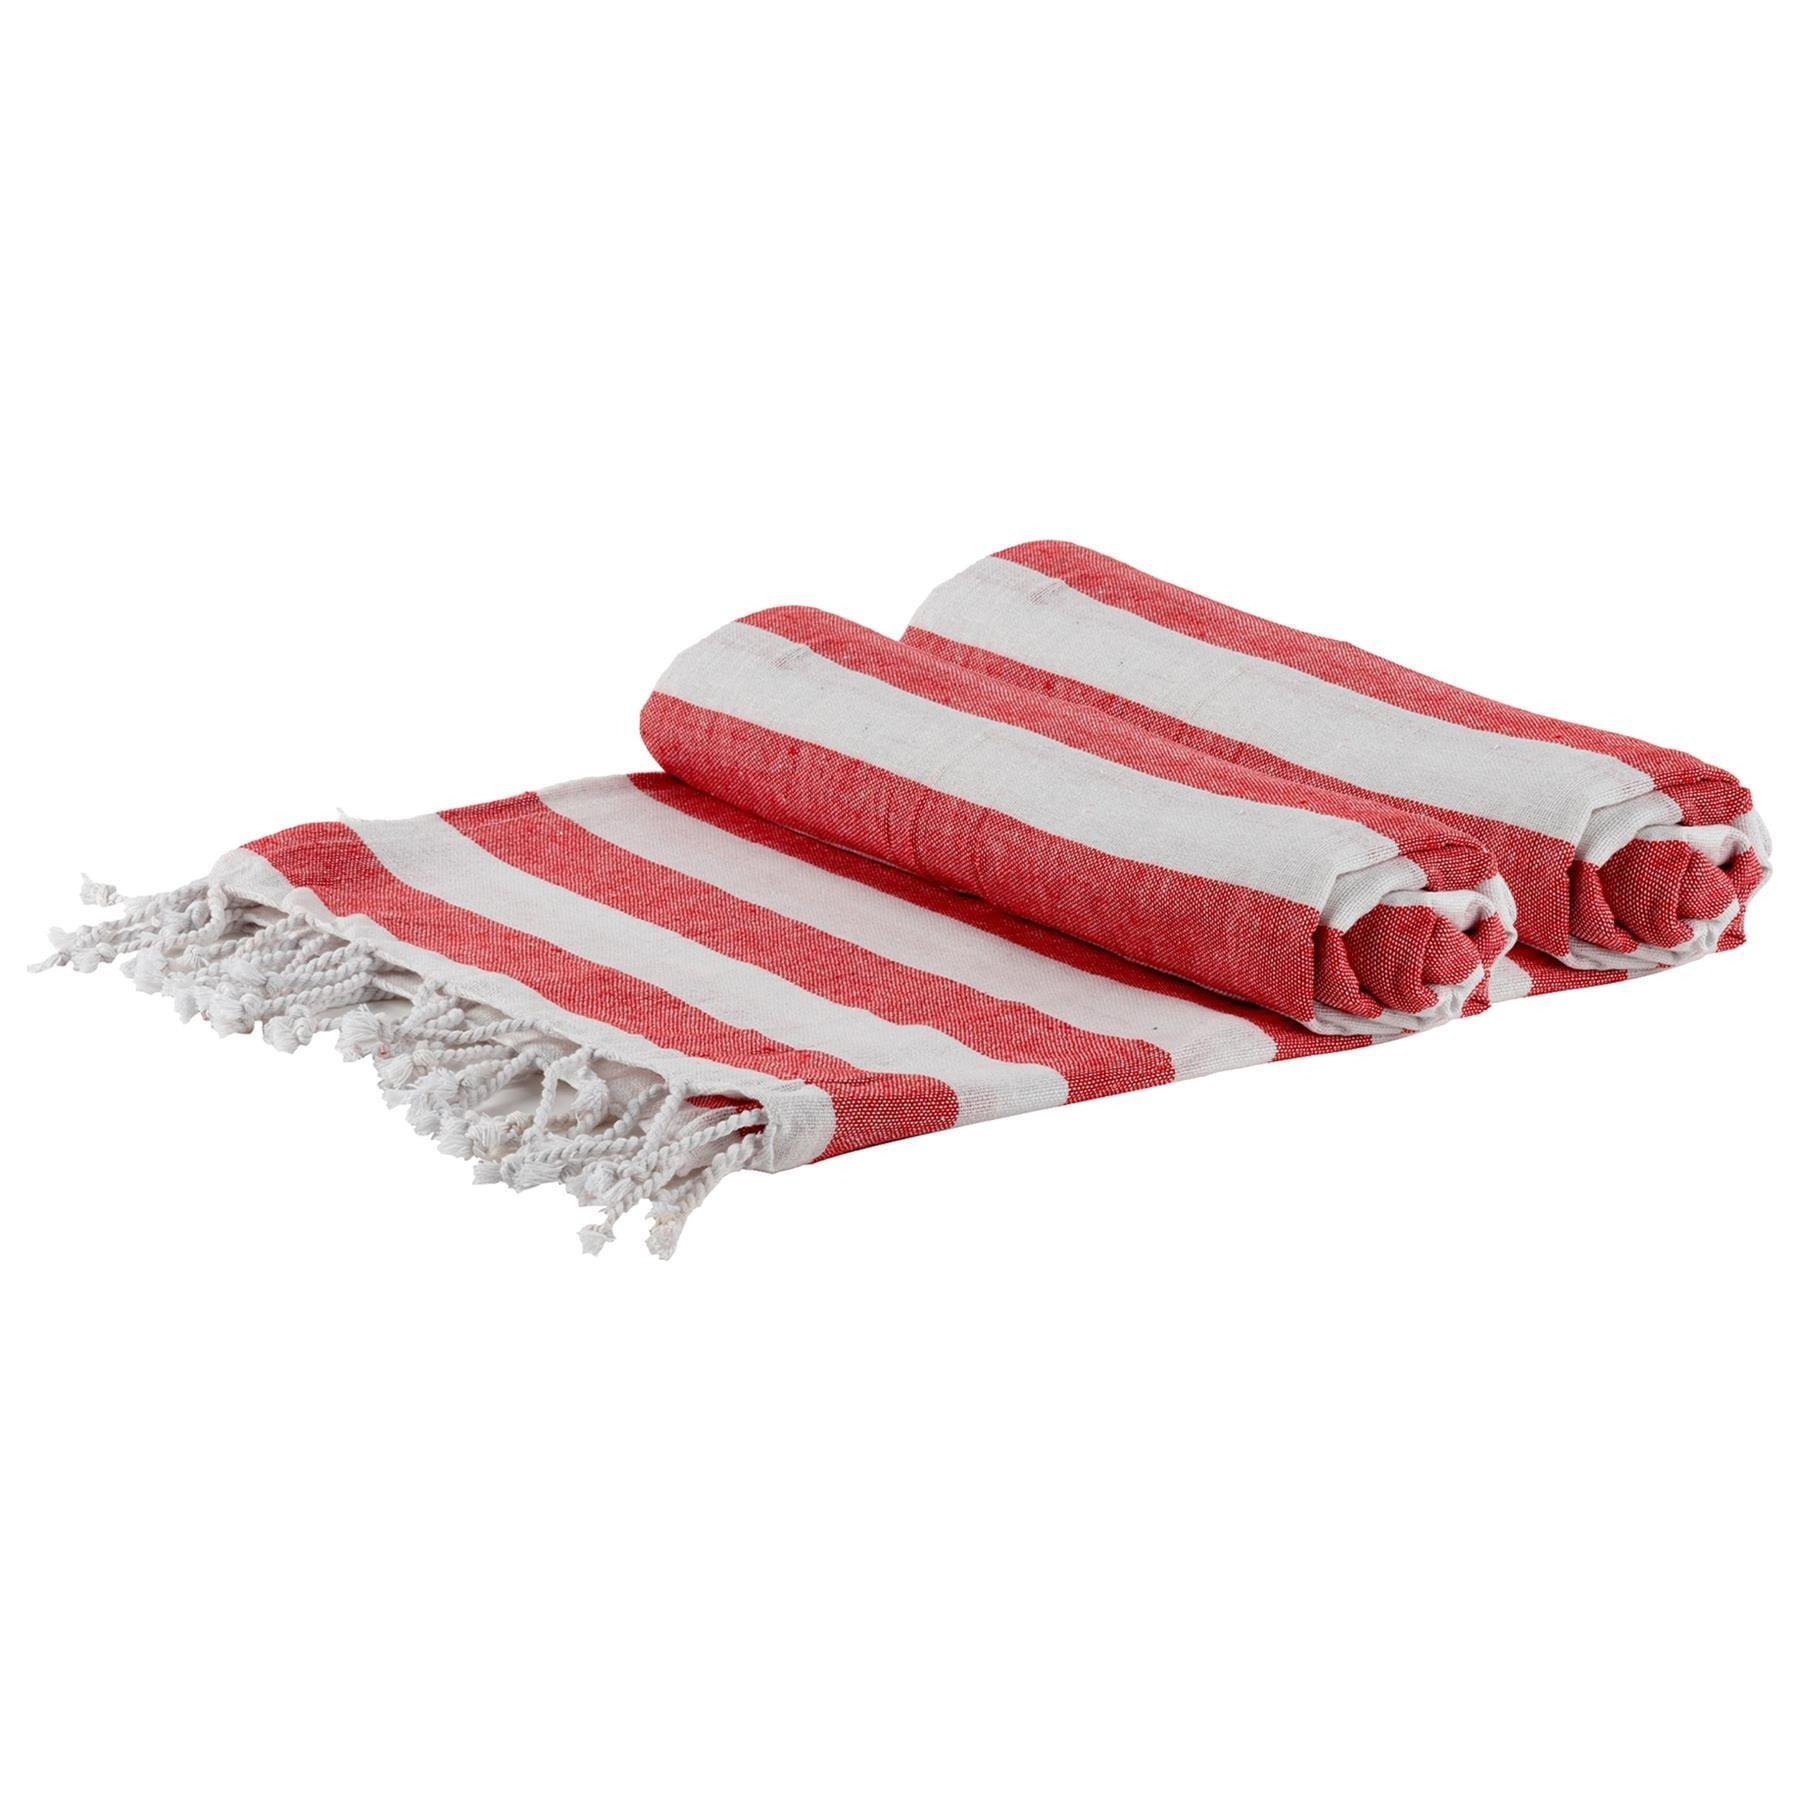 Turkish Cotton Bath Towels 170 x 90cm Red Stripe Pack of 2 - image 1